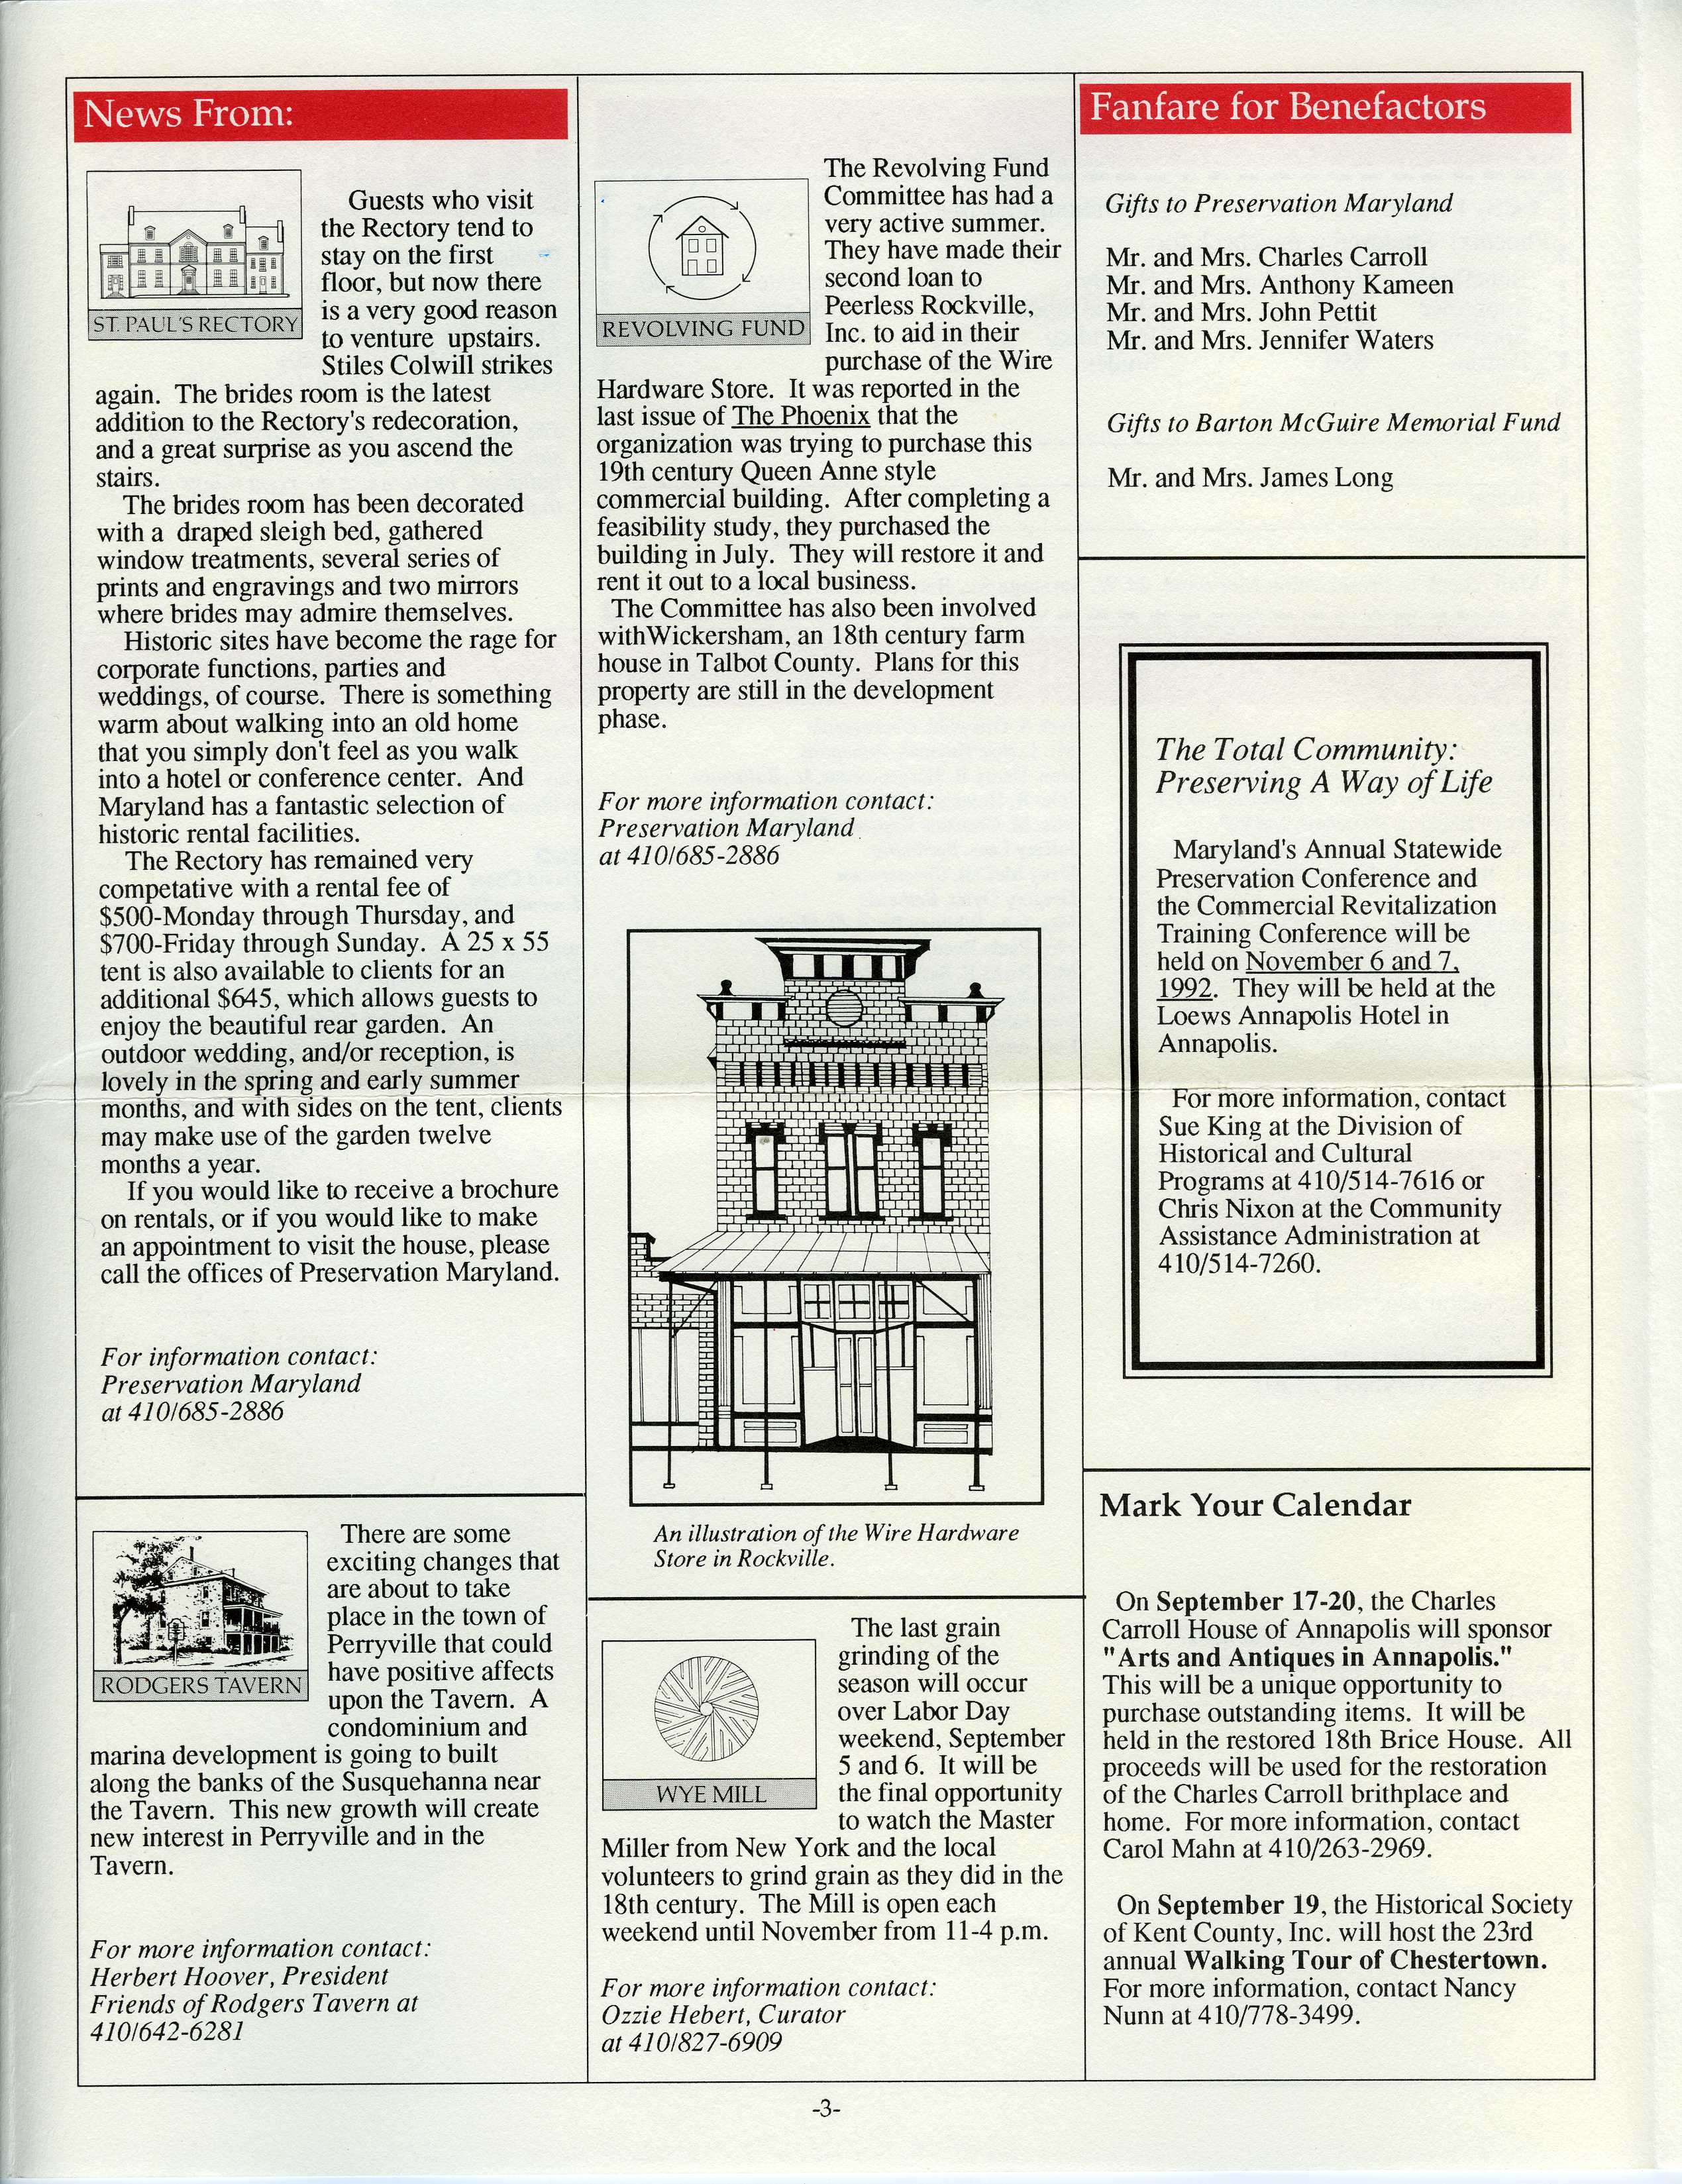 Preservation Maryland makes second grant to Peerless to purchased Wire Hardware. Image in The Phoenix Sept/Oct 1992